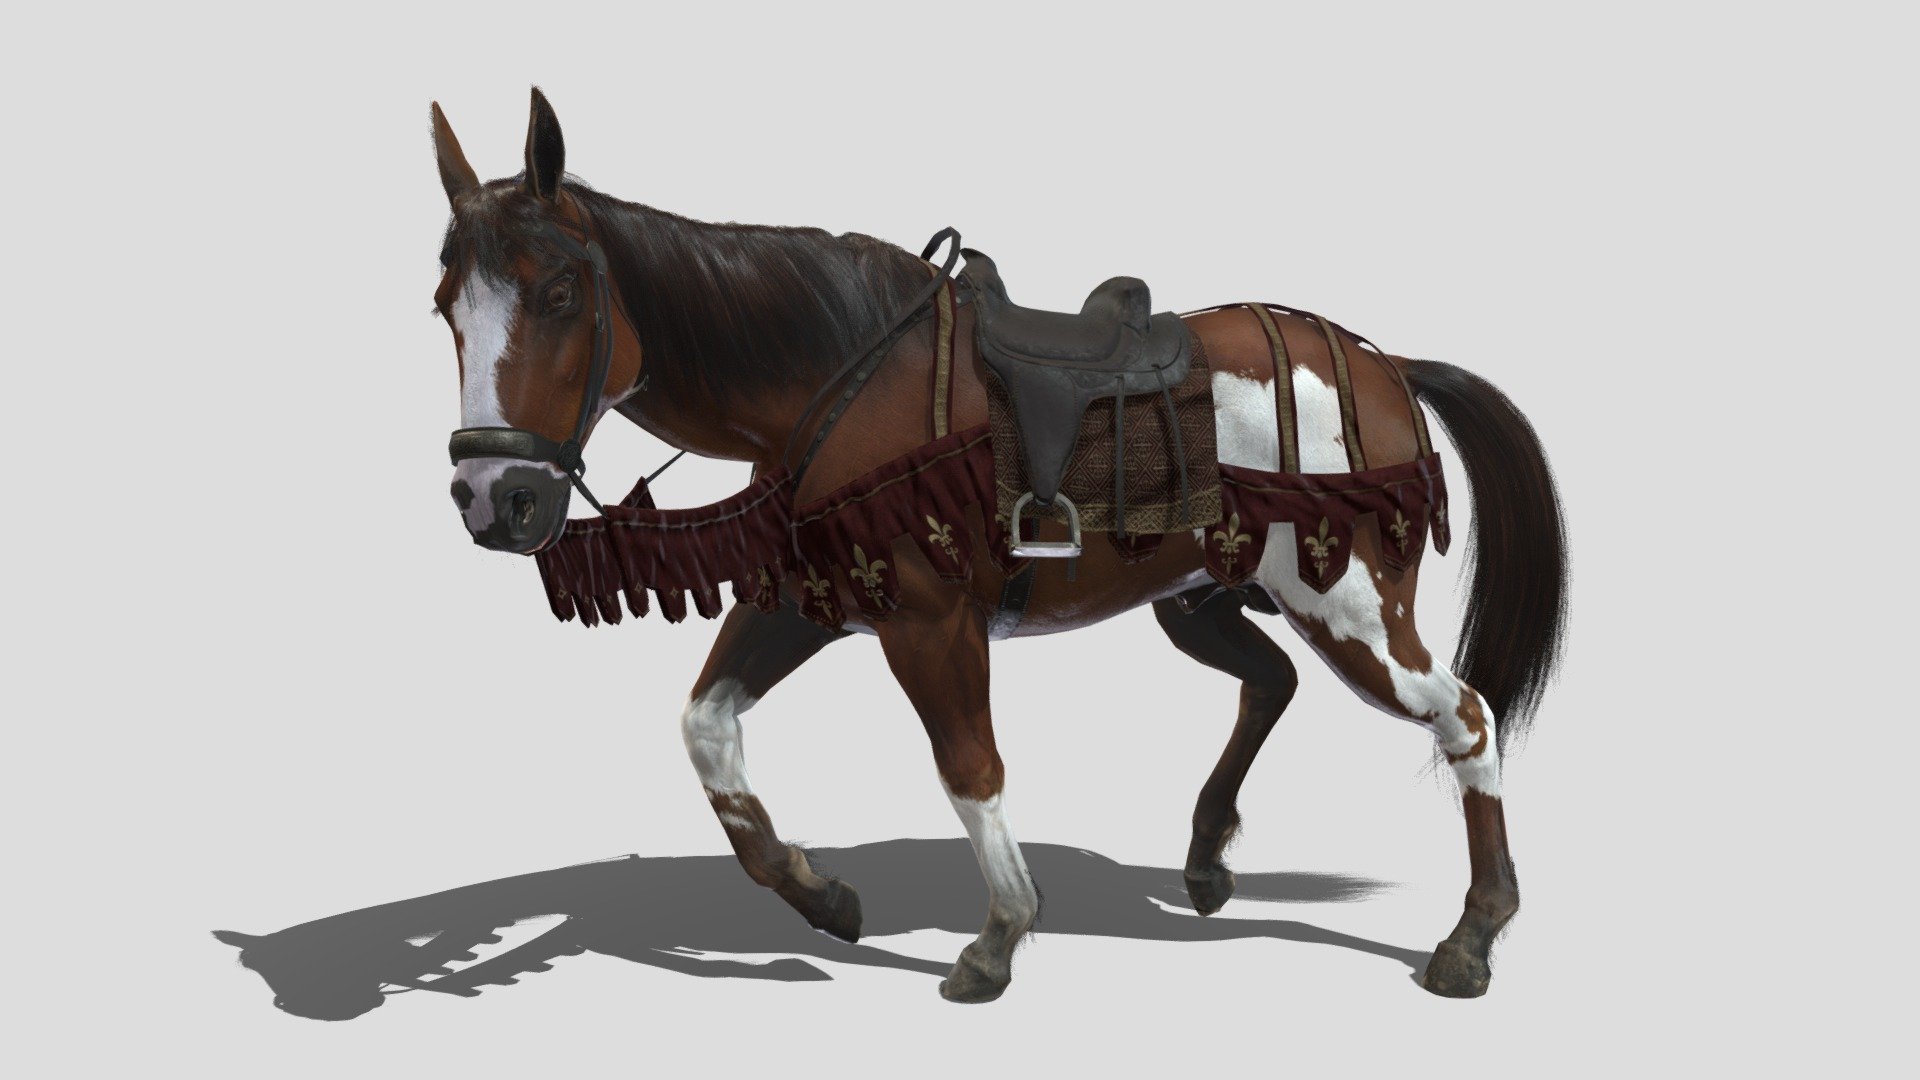 Game dev horse for testing with unreal.

Some old clips can be seen here:  https://www.youtube.com/watch?v=Onh7UwBSQPk - Horse - 3D model by studio lab (@leonlabyk) 3d model